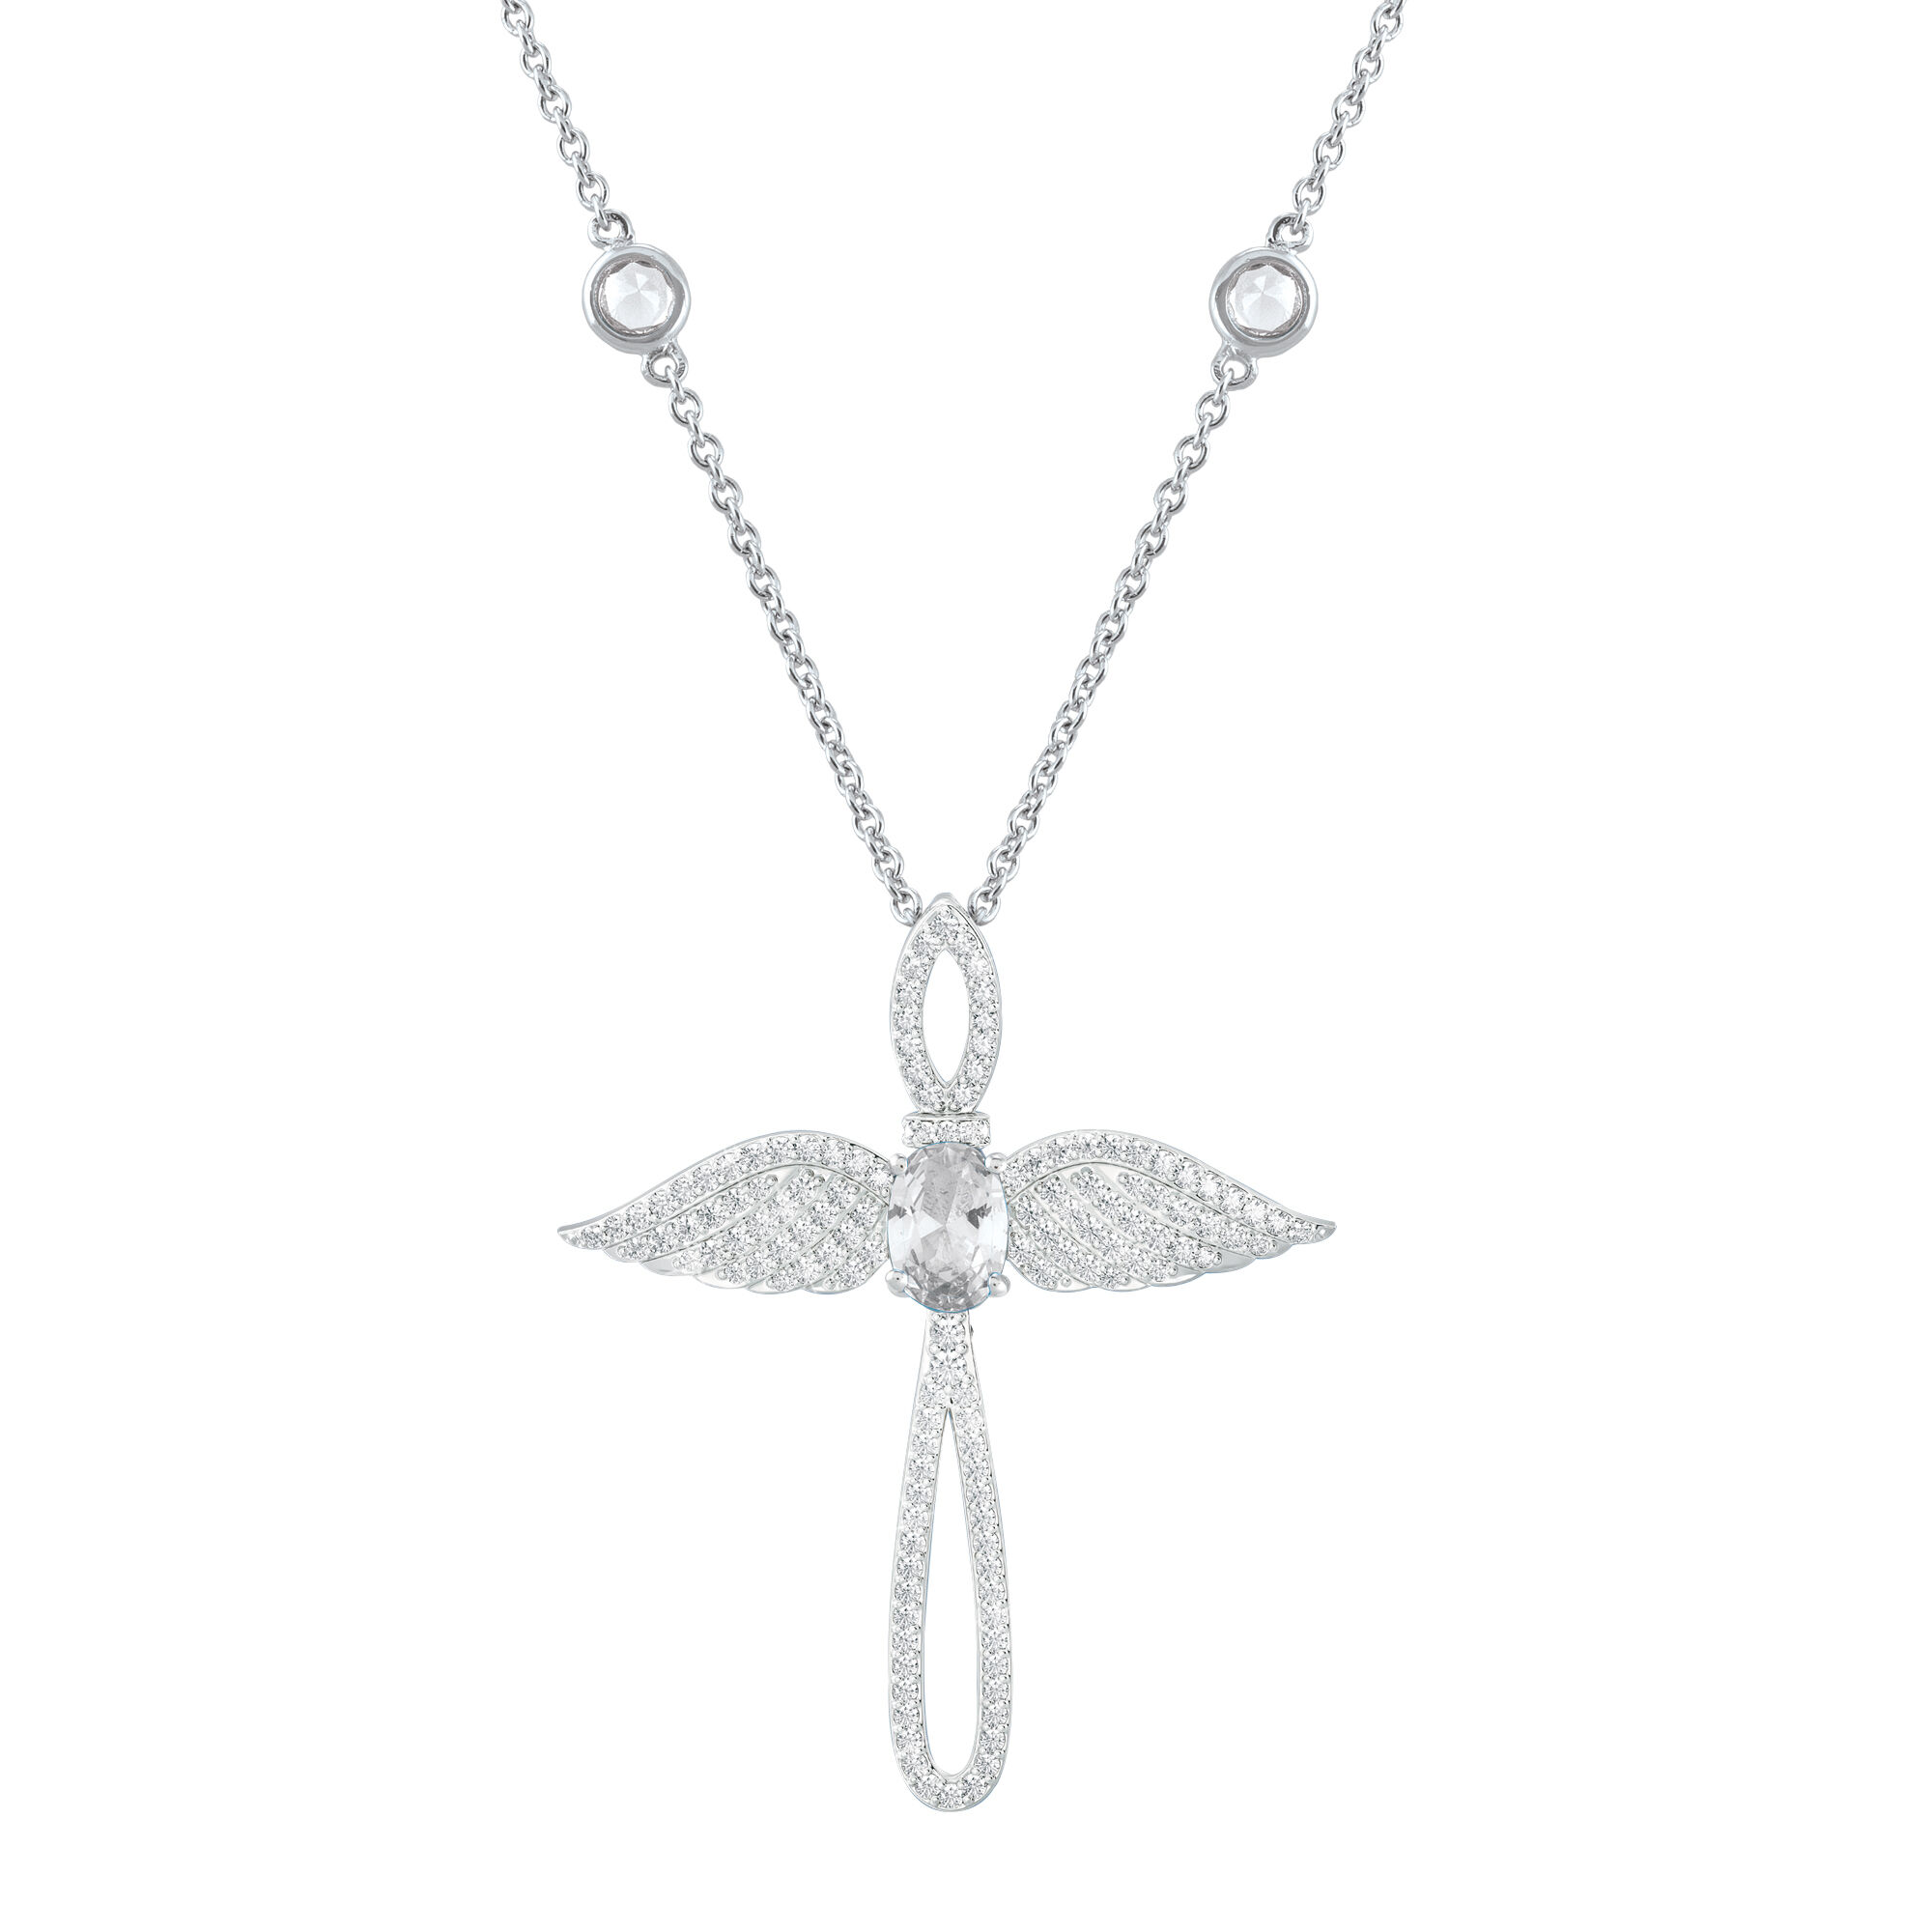 Touched by an Angel Birthstone Necklace 6842 0017 d april